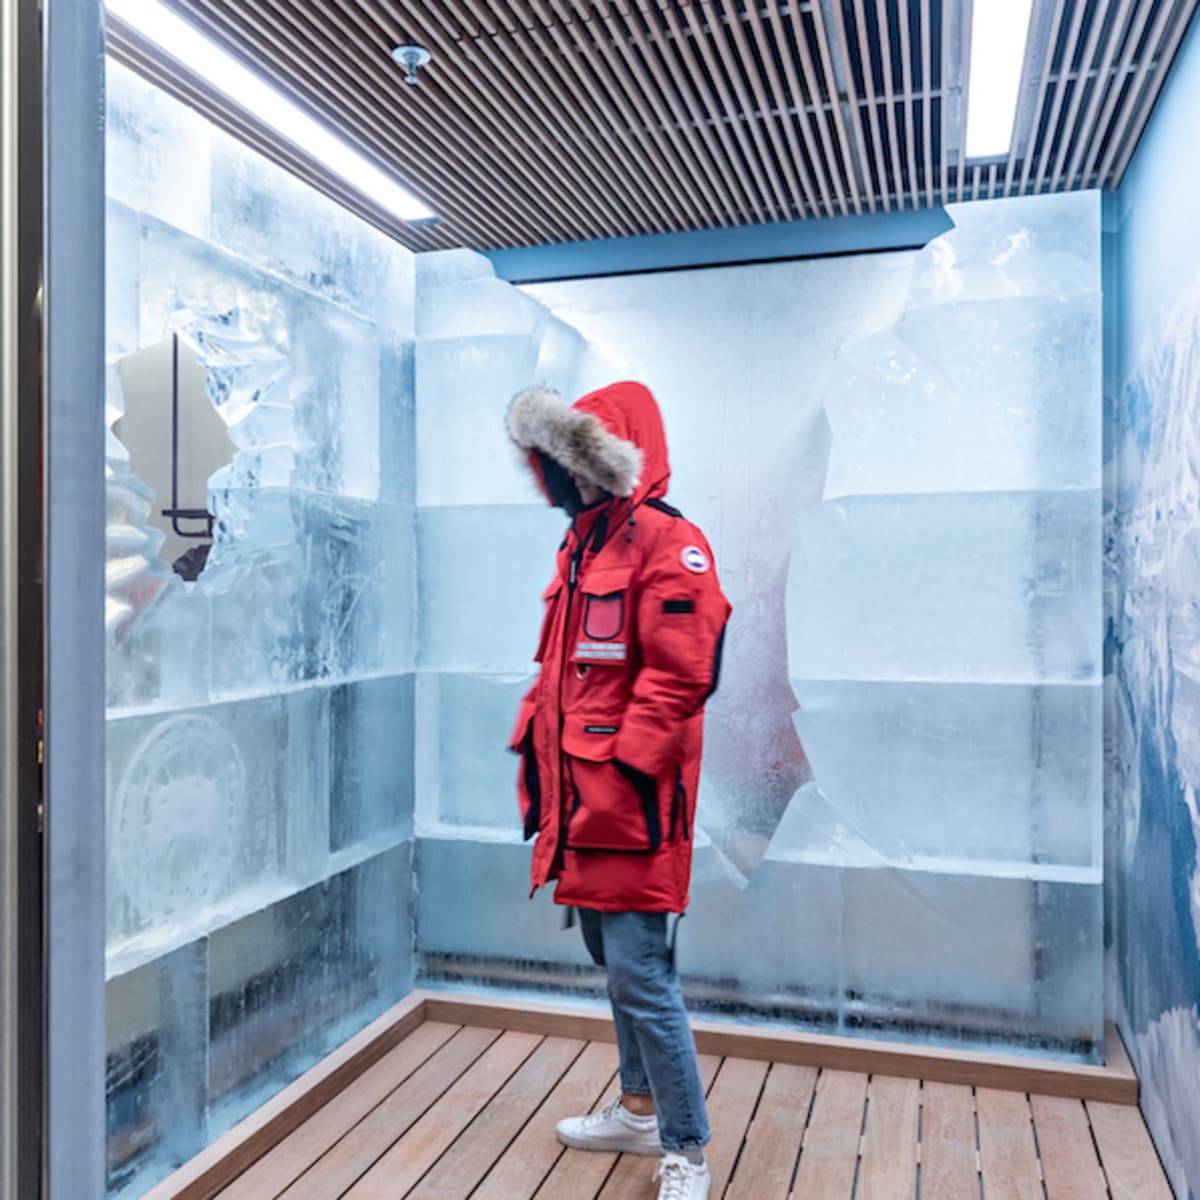 Canada Goose Opens The Cold Room So Customers Can Experience Its Warmth